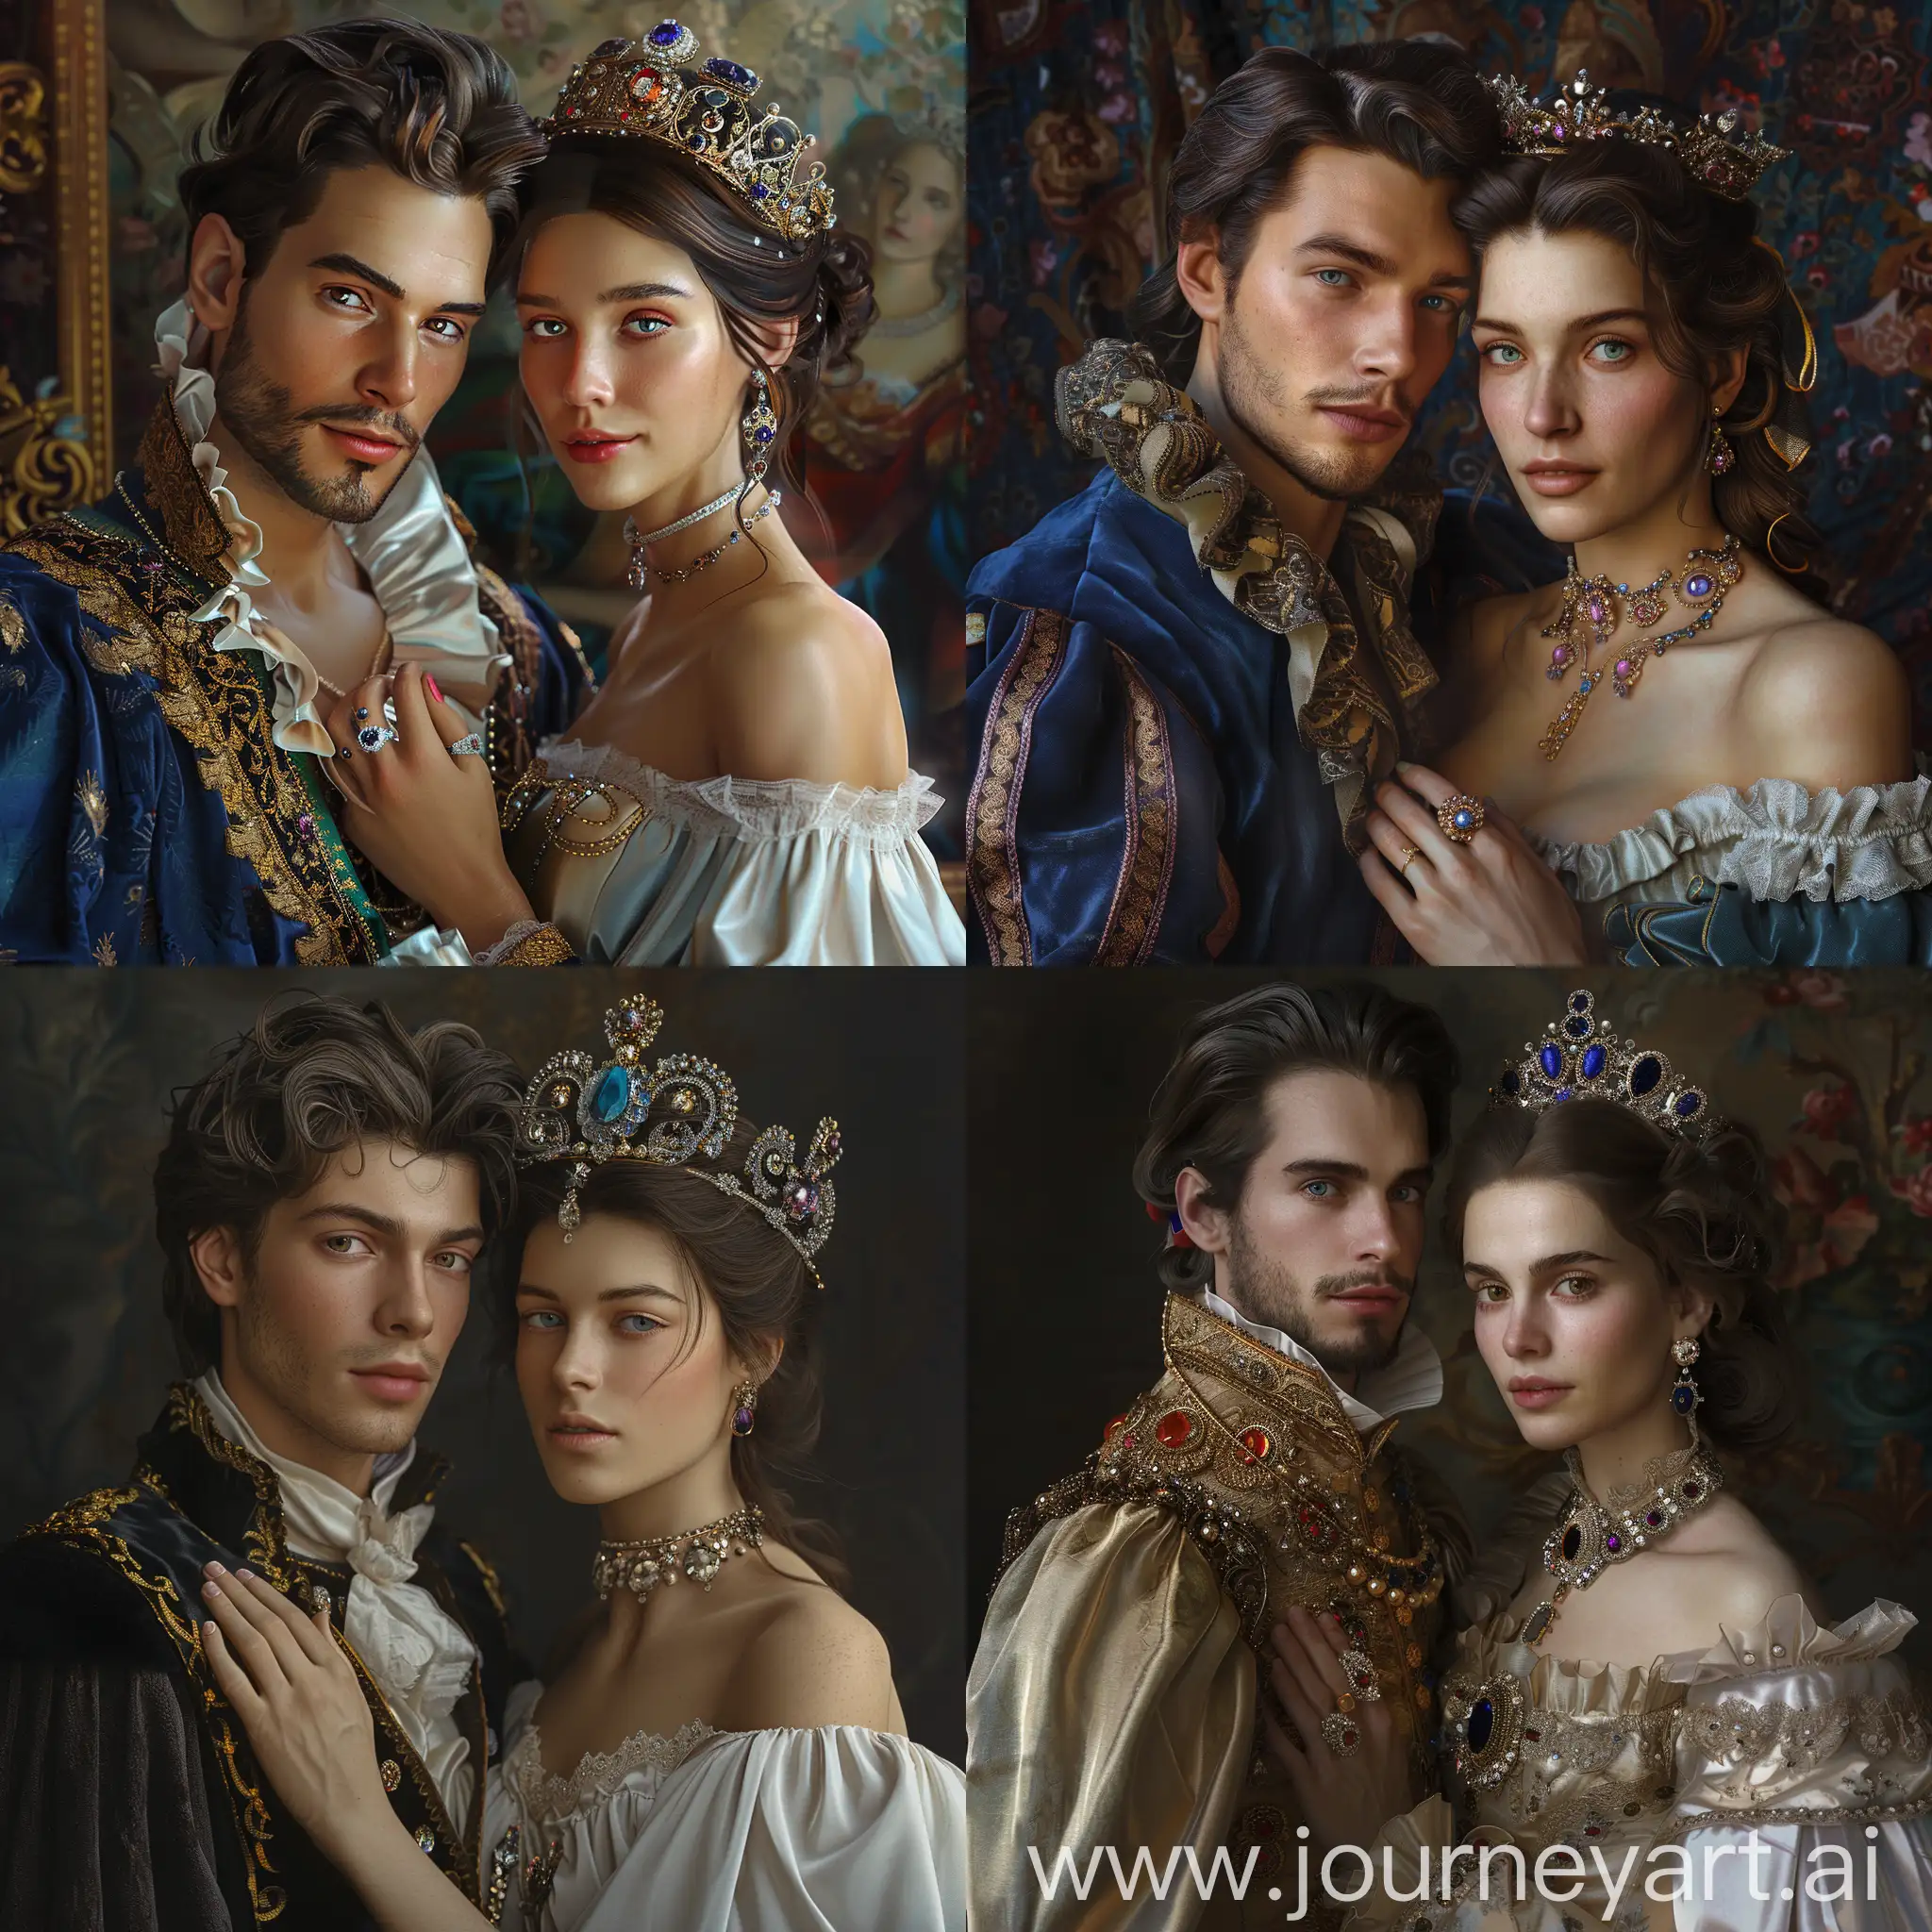 Romantic-Rococo-Portrait-with-Man-and-Woman-Wearing-Jeweled-Crown